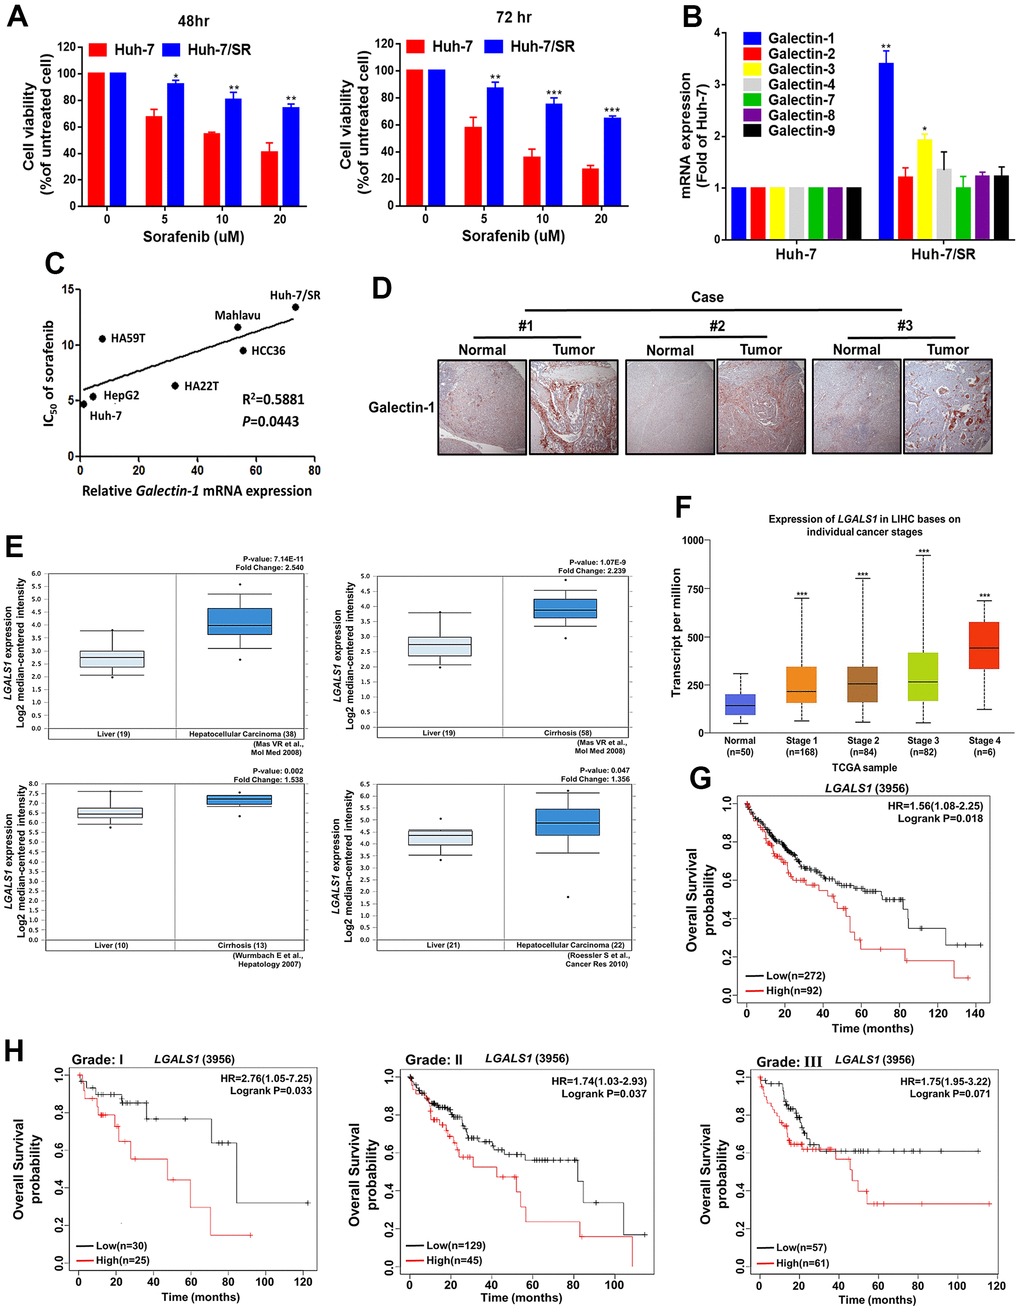 Galectin-1 expression is associated with patient survival and sorafenib response in HCC cells. (A) Sorafenib-resistant Huh-7 (Huh-7/SR) cells were established and exposed to various sorafenib doses for 48 and 72 h, and cell viability was measured using the 3-(4,5-dimethylthiazol-2-yl)-2,5-diphenyltetrazolium bromide (MTT) assay. (B) The mRNA expression of the Galectin family was examined in Huh-7 and Huh-7/SR cells through qRT-PCR. (C) Correlation between Galectin-1 expression and IC50 of sorafenib in a panel of HCC cells. Pearson’s correlation r = 0.5881, and P = 0.0443. (D) Immunohistochemistry staining was performed to examine Galectin-1 expression in normal liver tissue and HCC tissues. (E) The Oncomine database was analyzed to evaluate Galectin-1 expression in HCC tissues compared with normal tissues, with statistics from individual studies obtained from the Oncomine database; fold change (Log2 median-centered intensity) and P values are presented within the box plot. (F) Evaluation of Galectin-1 expression in different HCC stages by using The Cancer Genome Atlas database (http://ualcan.path.uab.edu/index.html). (G) Kaplan–Meier plot revealing the association of Galectin-1 with overall survival in patients with HCC. High Galectin-1 expression was associated with poor survival in patients with HCC. Hazard ratios and P values are presented within the box plot. (H) Analysis of HCC cells of different tumor grades revealed that high Galectin-1 expression was associated with low overall survival. Hazard ratios and P values are presented within the box plot. Data are representative of at least three independent experiments performed in triplicate. Data are presented as means ± standard deviations. *P P P t test).